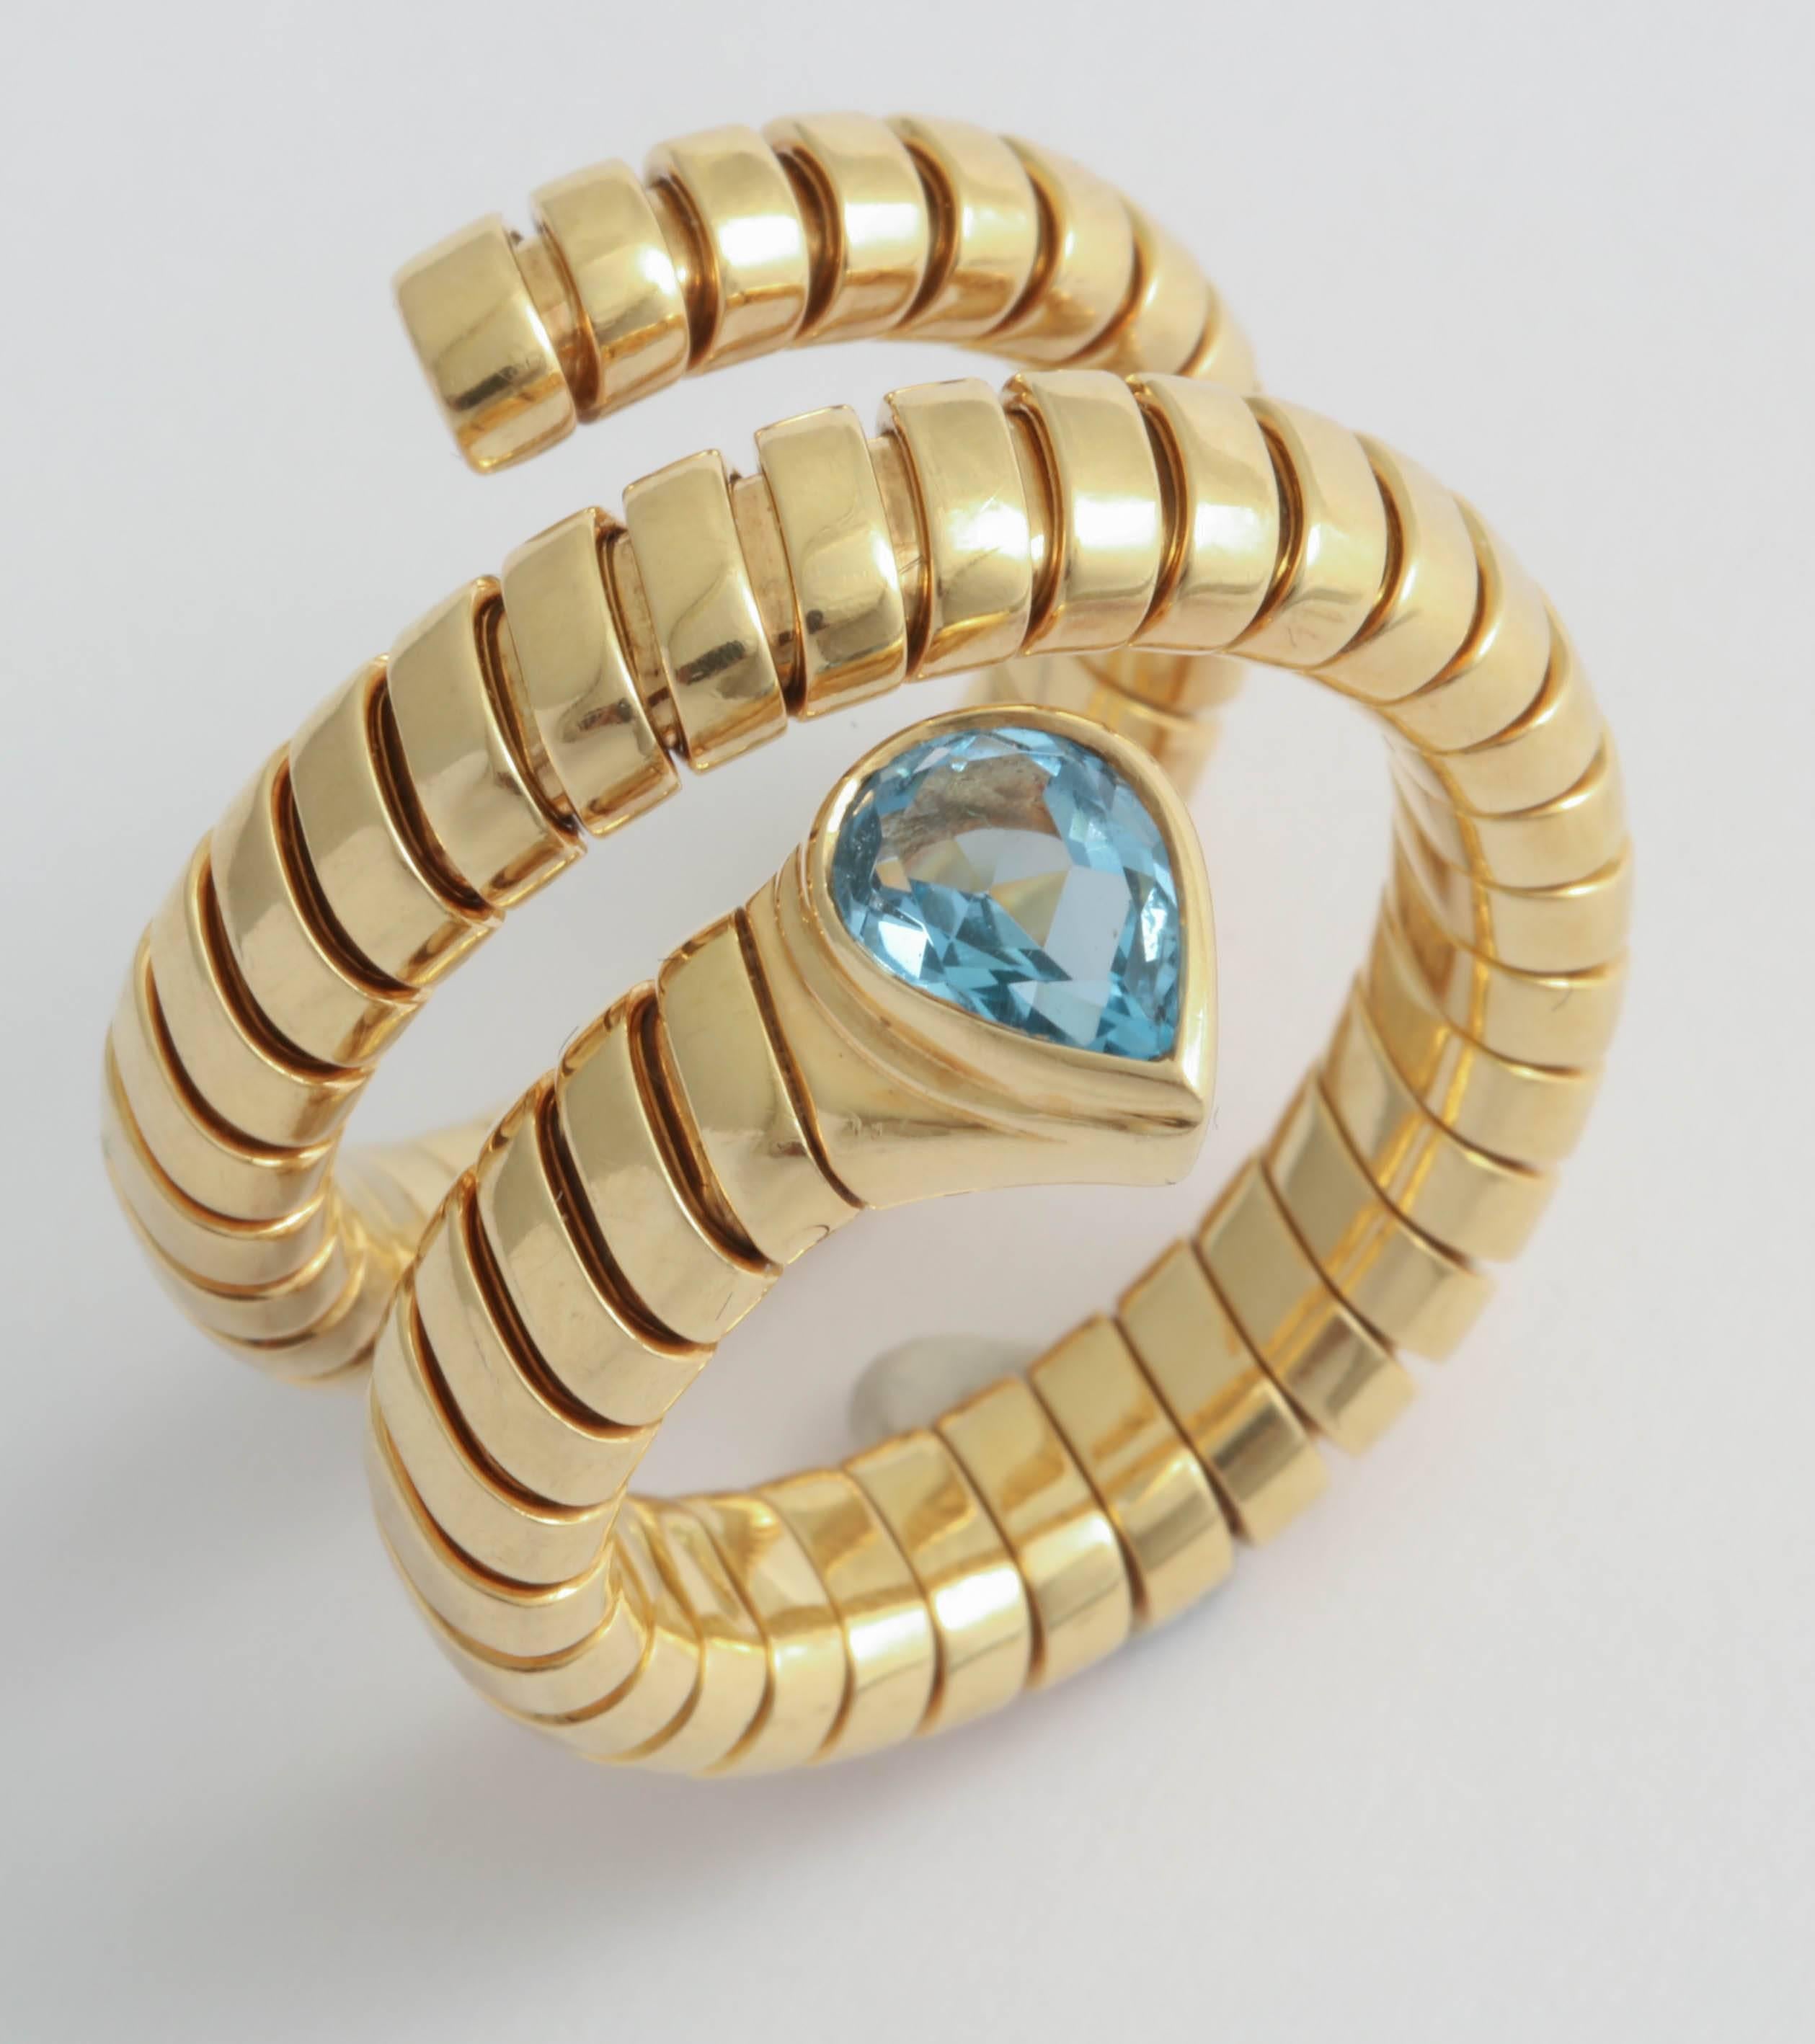 Beautiful Turbogas Snake Ring set with Marquise shaped Blue Topaz. Signed Bulgari - Italy - 750 w Italian Control marks.  A real vintage look!  Bulgari- can't be bad - try to find one.